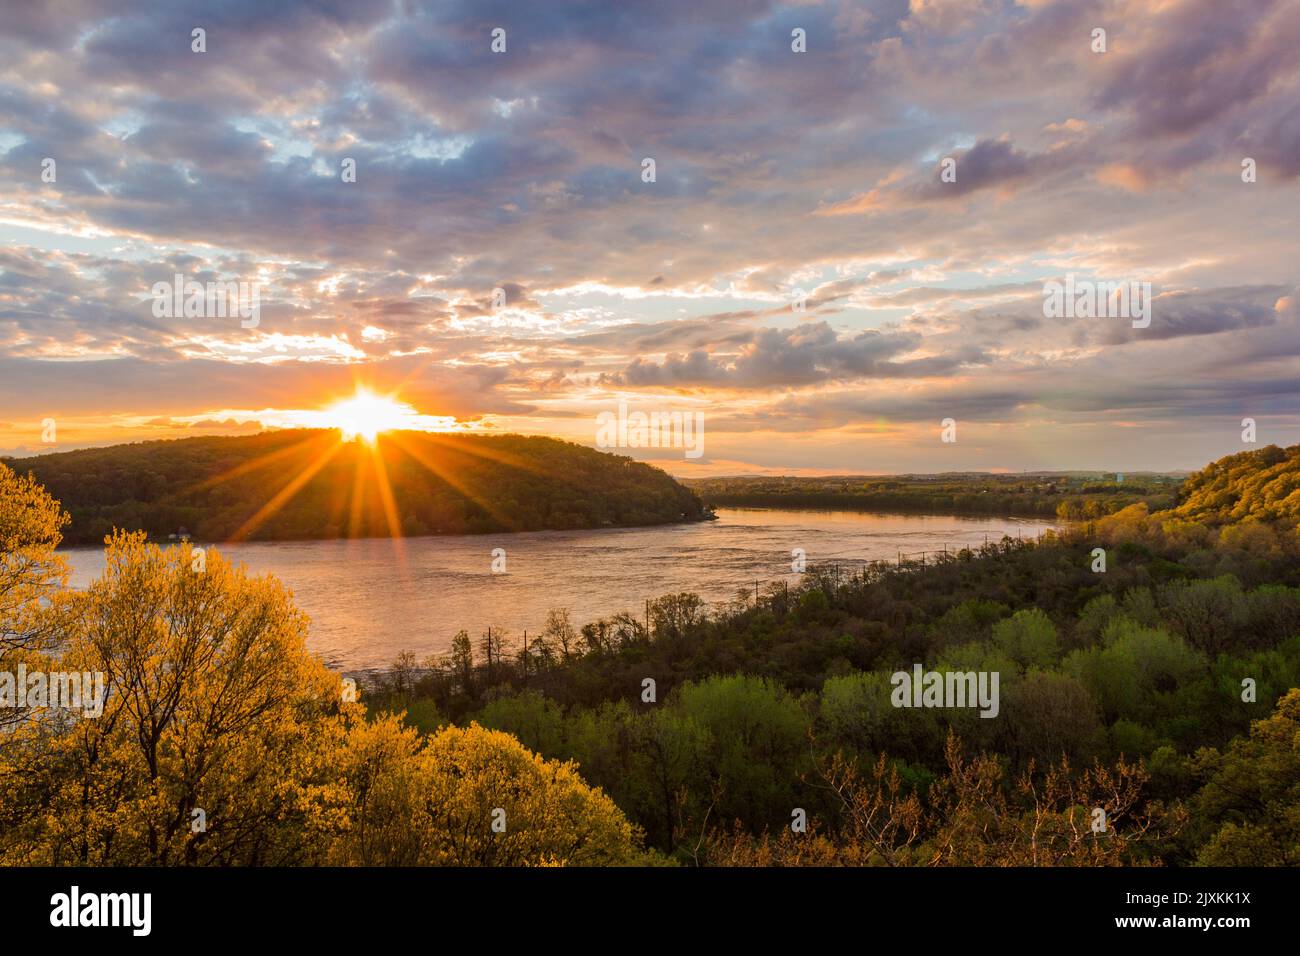 Overlooking the Susquehanna river at chickies rock. Stock Photo